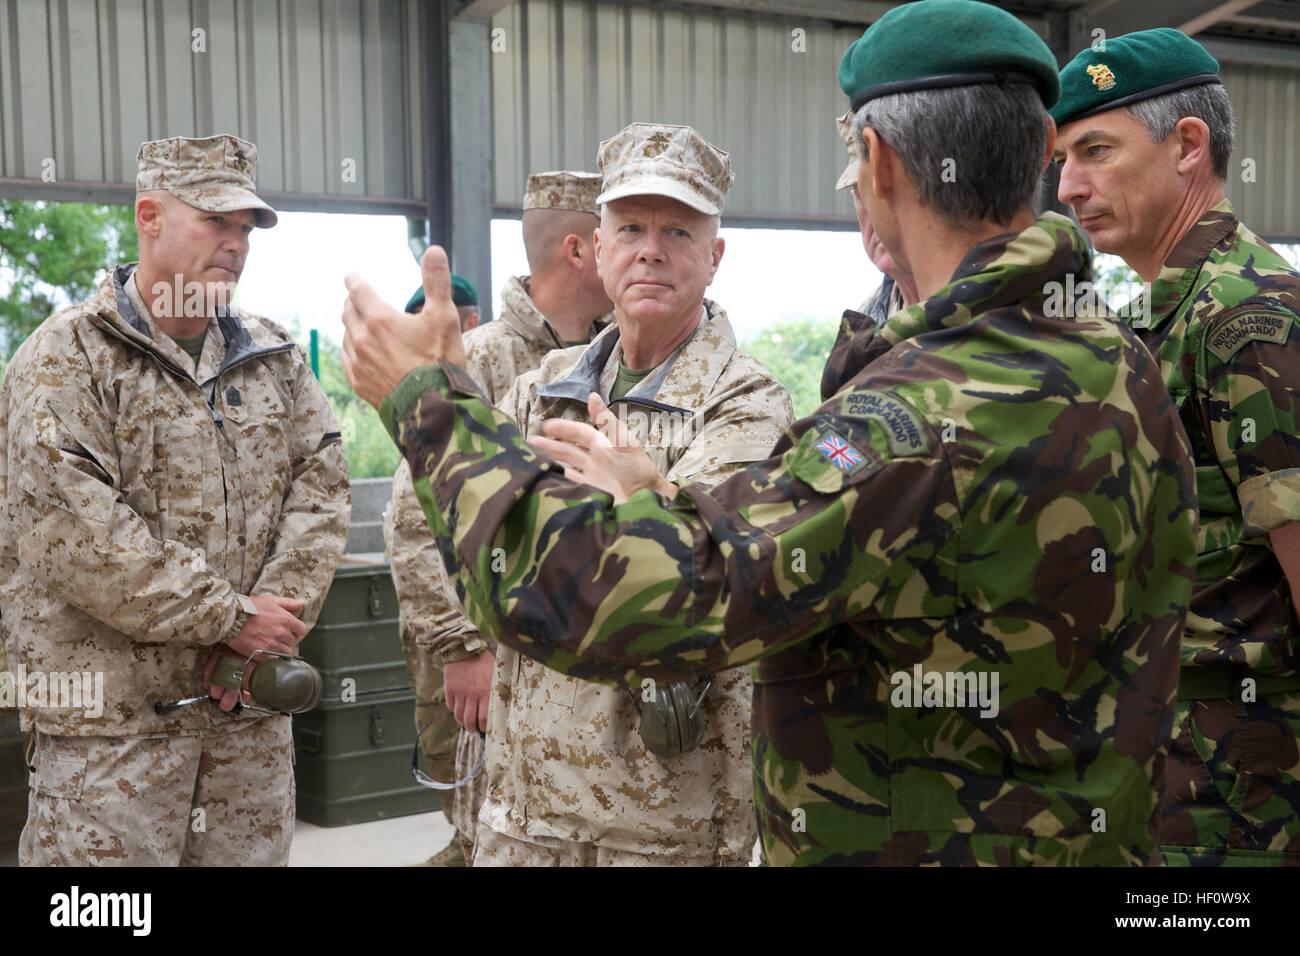 U.S. Marine Corps Gen. James F. Amos, center, the commandant of the Marine Corps, and Sgt. Maj. Micheal P. Barrett, left, the sergeant major of the Marine Corps, speak with British Royal Marines at the Commando Training Center Royal Marines in Lympstone, Devon, England, June 6, 2012. Amos visited the facility to observe training practices. (U.S. Marine Corps photo by Sgt. Mallory S. VanderSchans/Released) United Kingdom tour 120606-M-LU710-175 Stock Photo